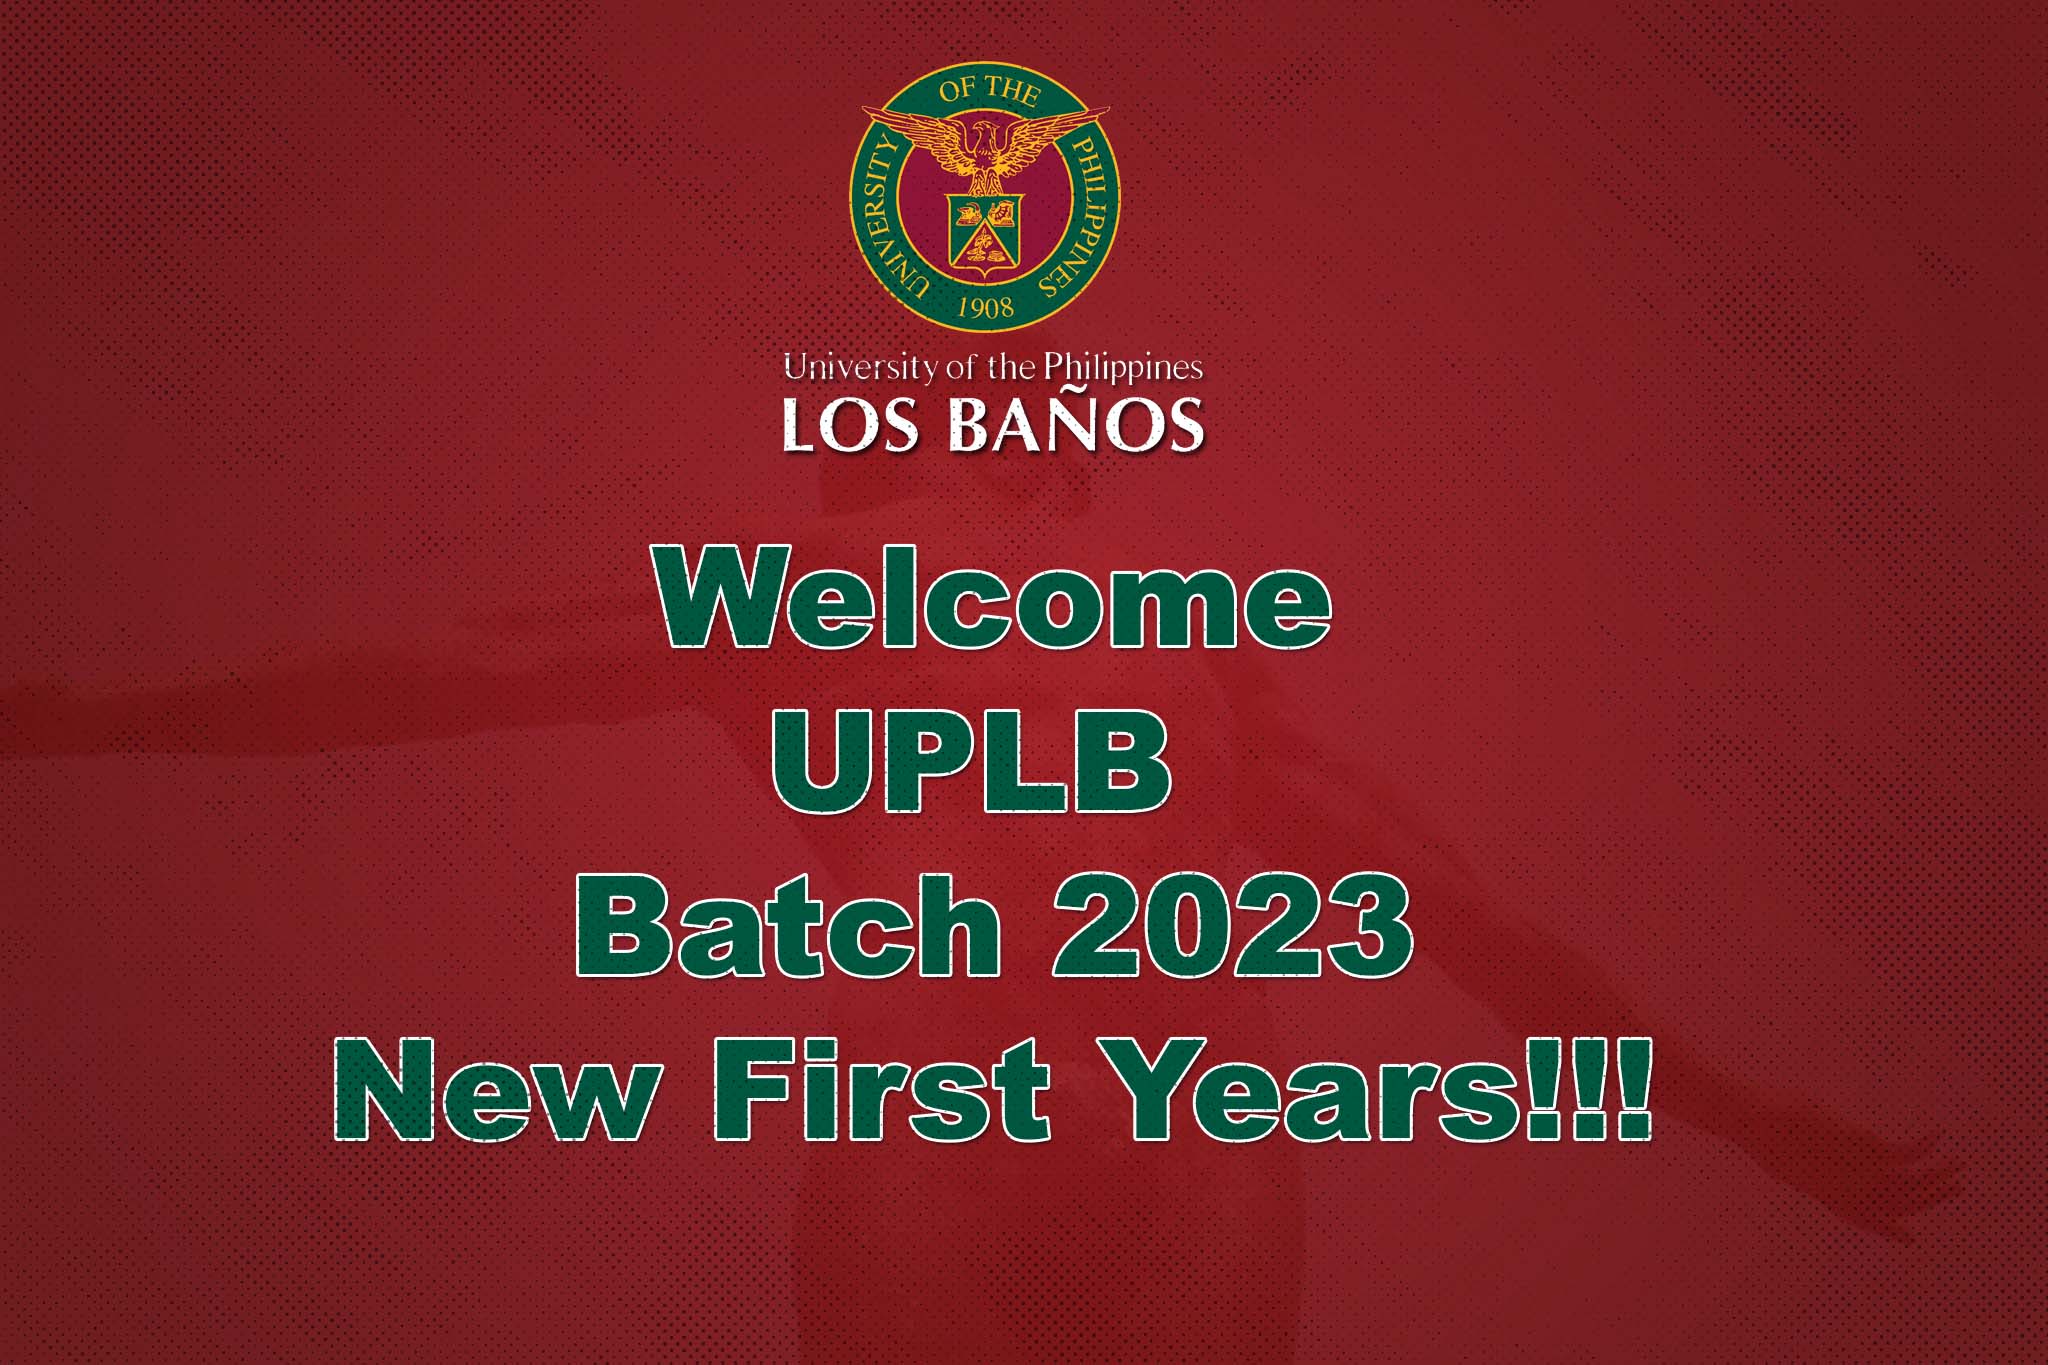 Welcome UPLB Batch 2023 New First Years!!!